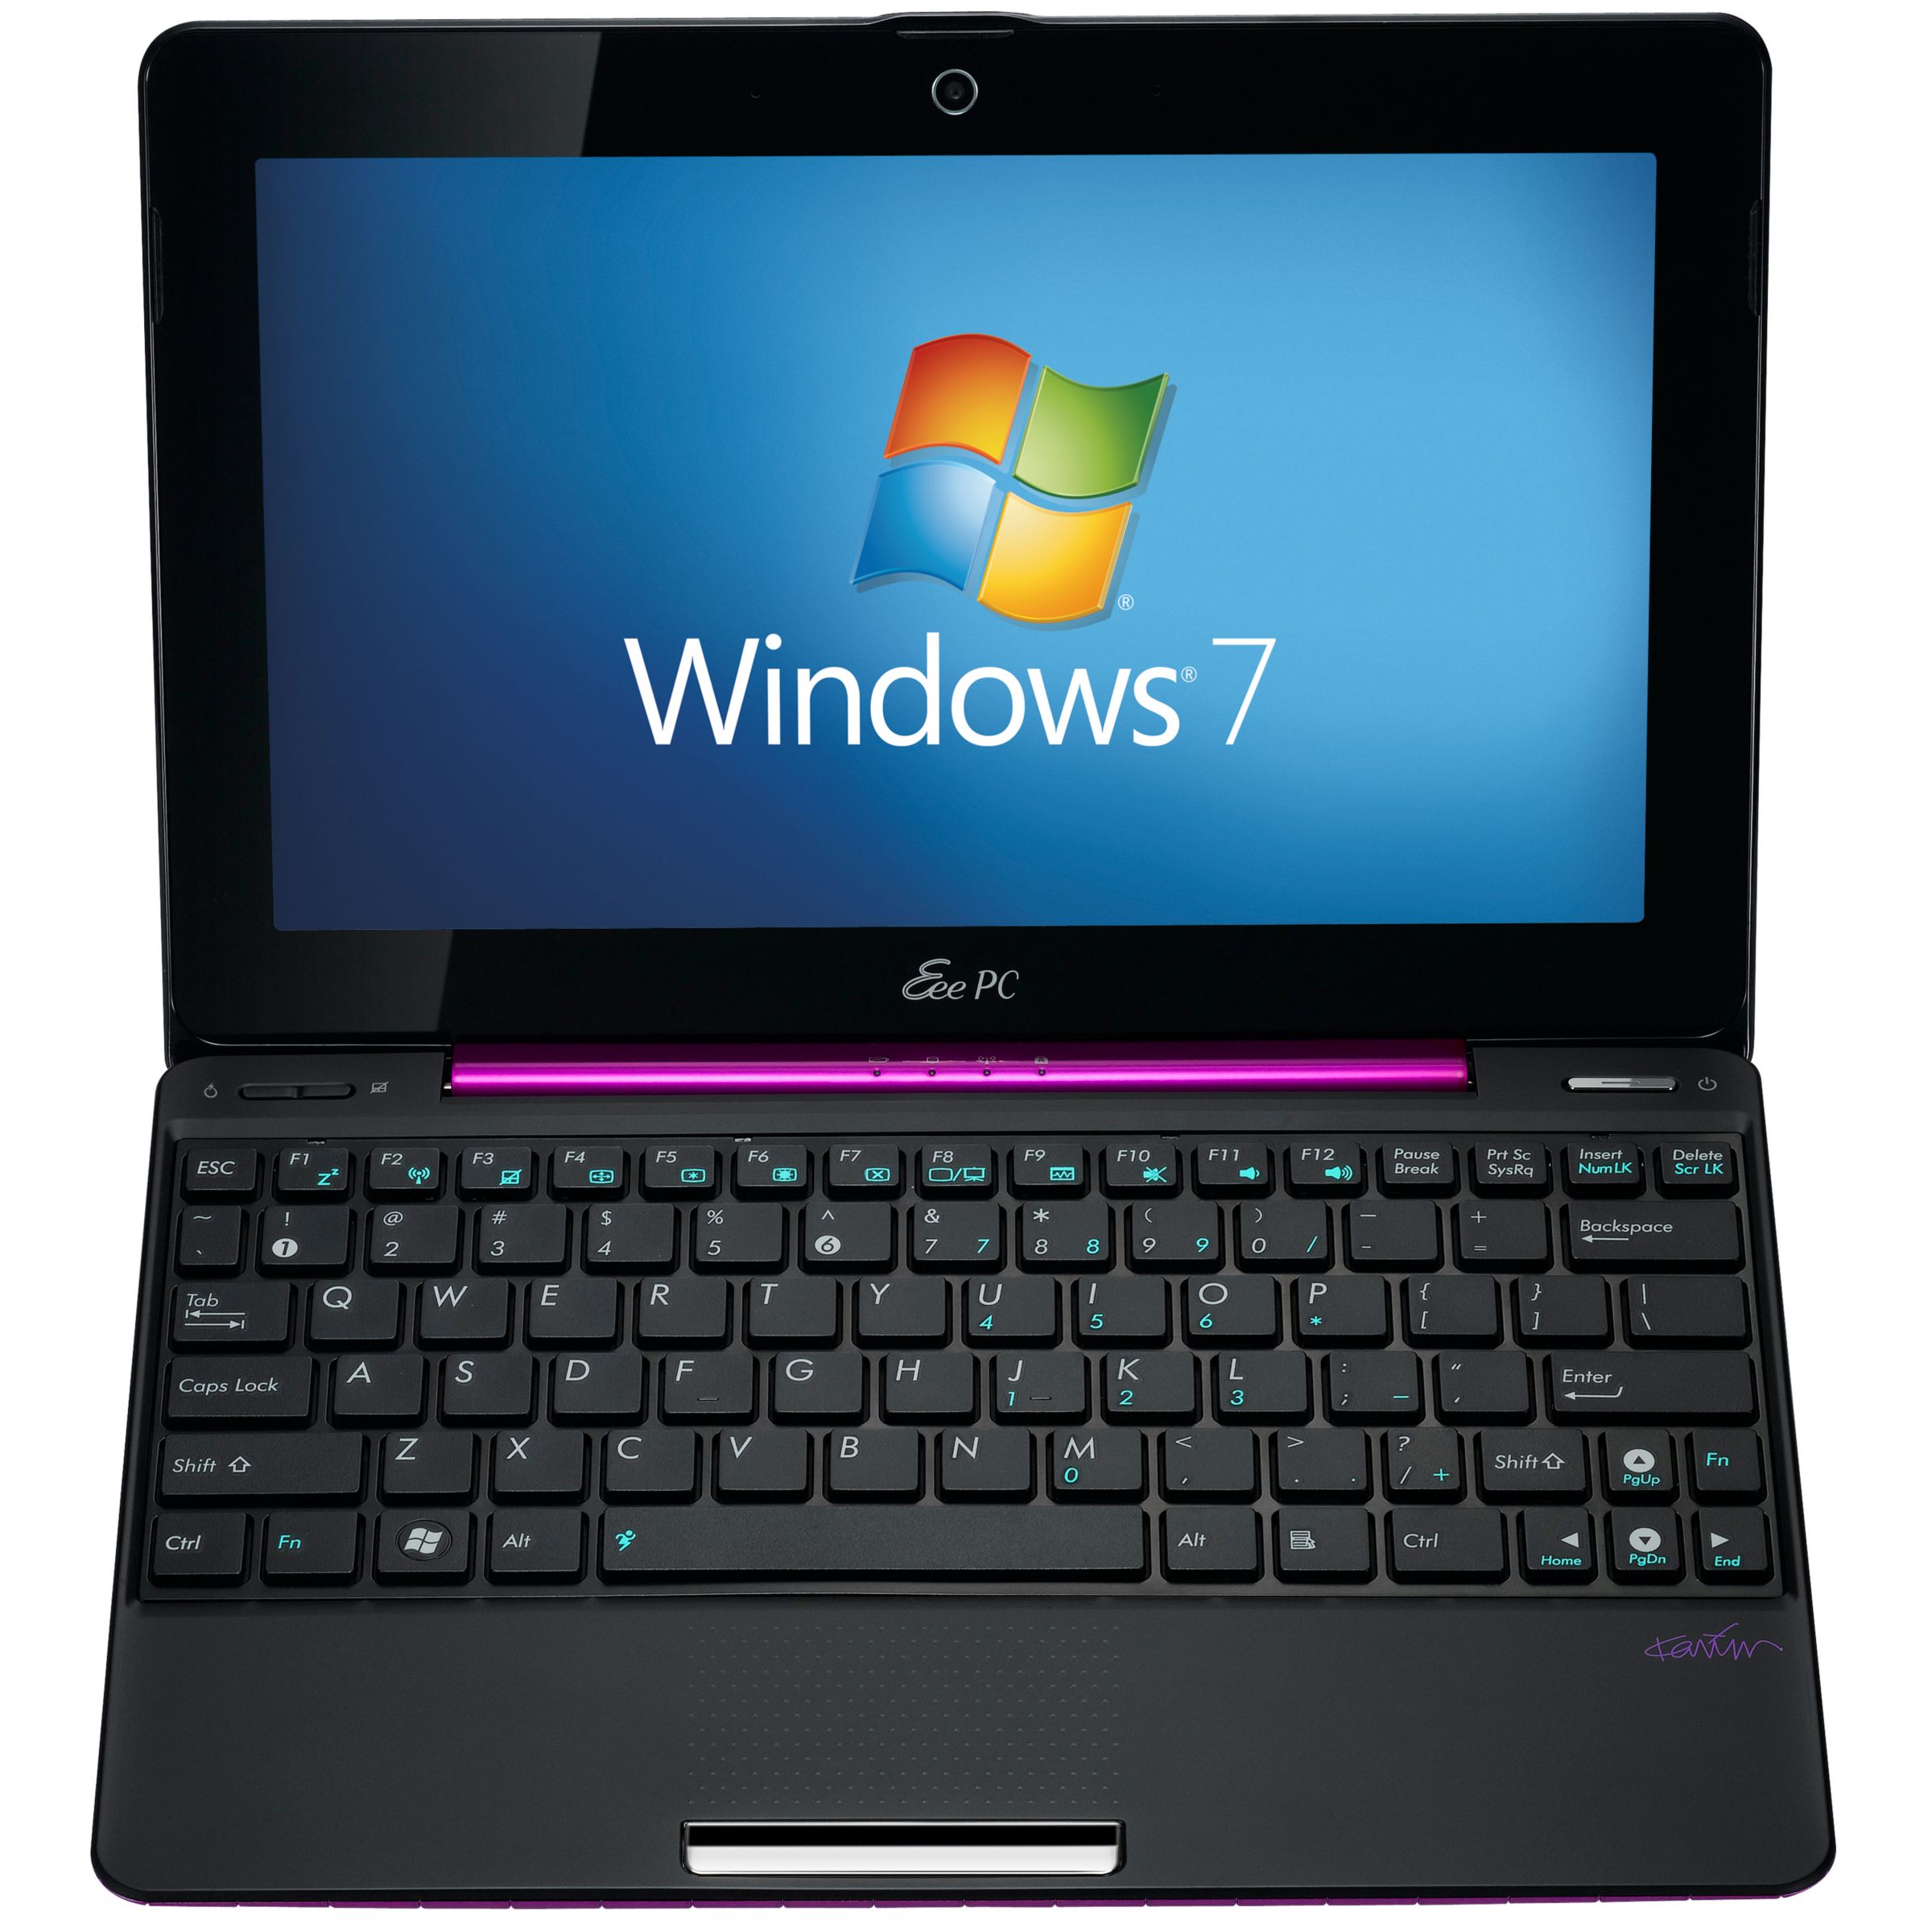 Asus 1008P-PCH011S Netbook, 1.66GHz with 10.1 Inch Display, Pink at John Lewis